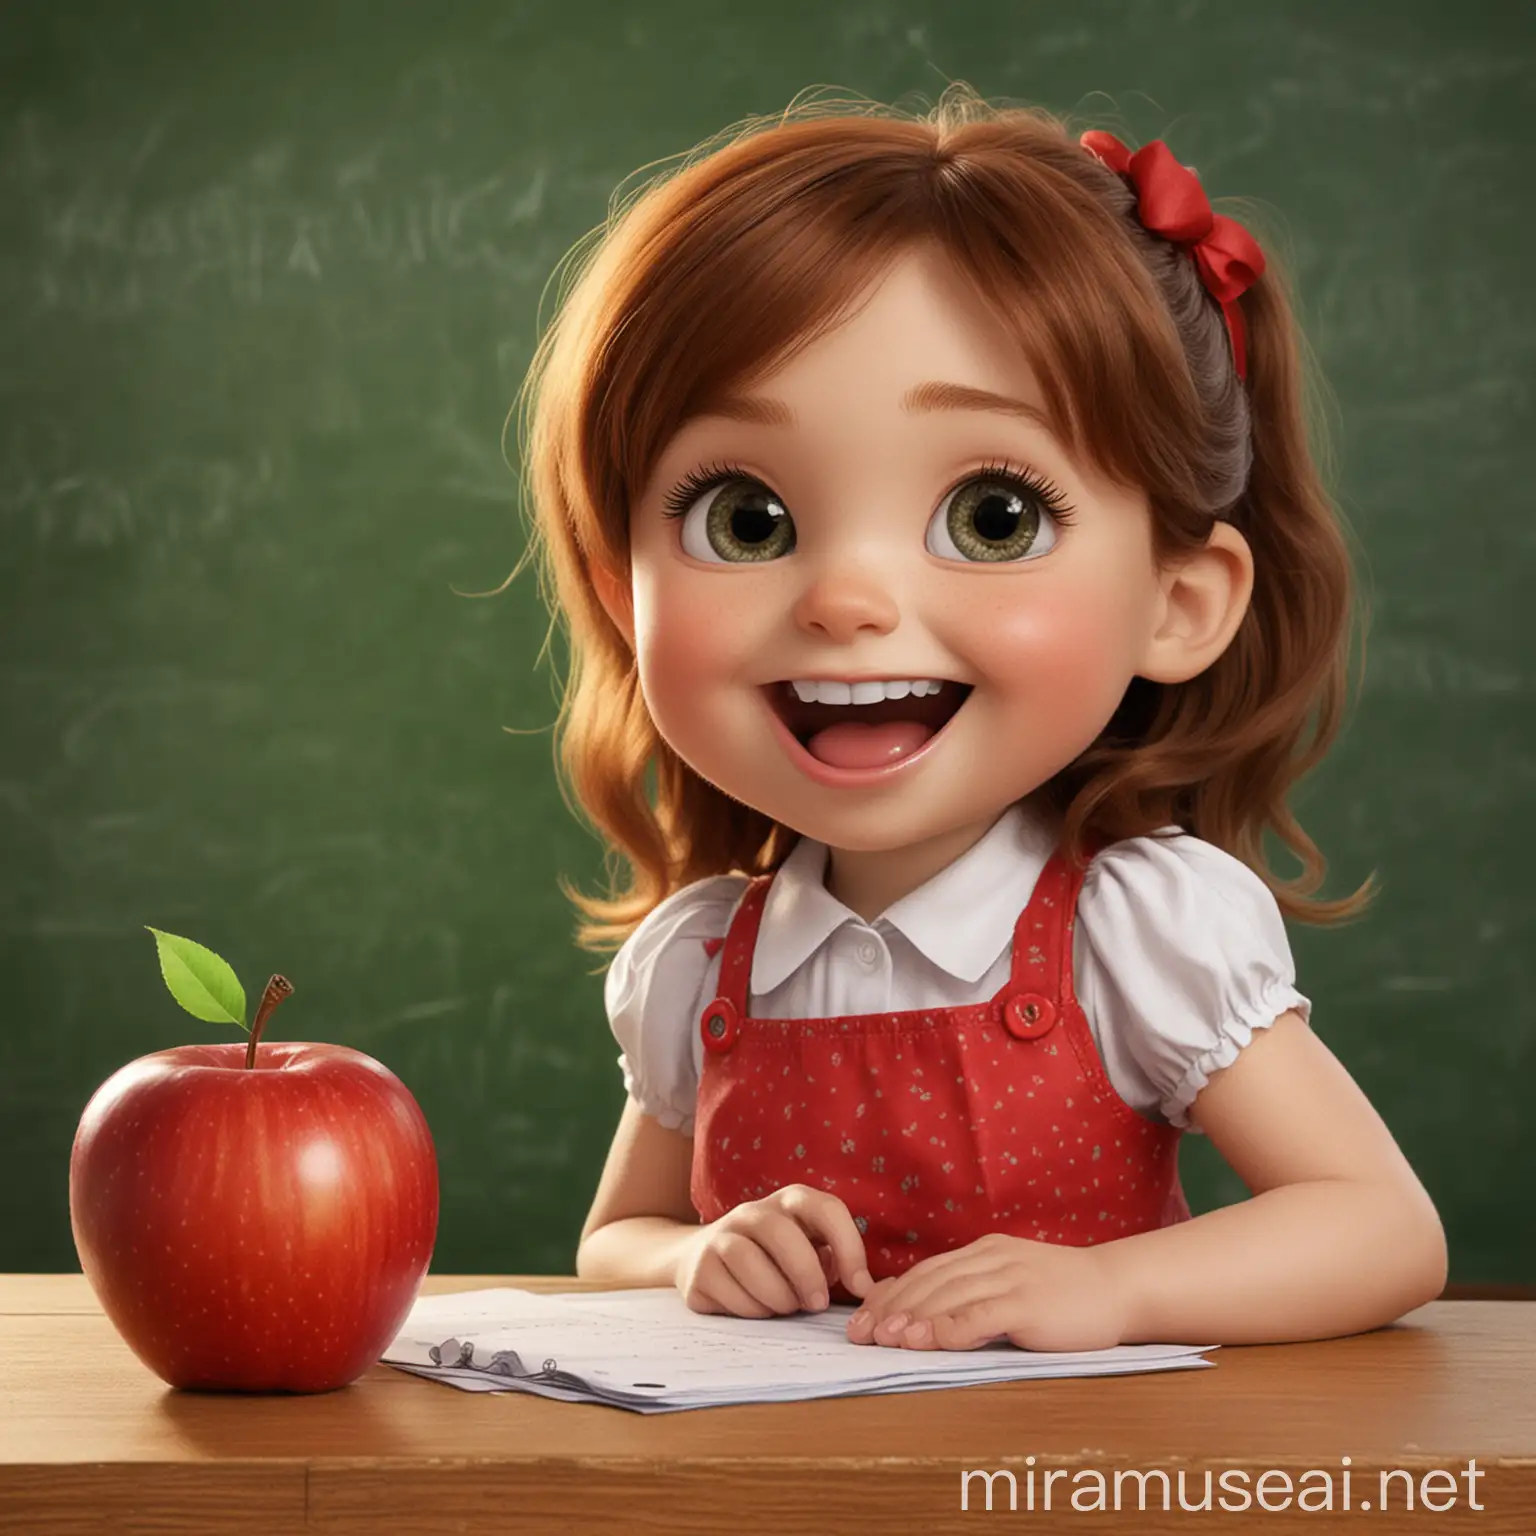 Once upon a time, there was a little girl named Amy who loved to learn new things. She was very excited to start school and learn how to read and write.

On her first day of school, Amy's teacher introduced her to the letter "A". The teacher held up a big, red apple and asked the class if they knew what letter the word "apple" started with. Amy quickly raised her hand and shouted, "A!" The teacher smiled and said, "That's right, Amy! A is for apple."